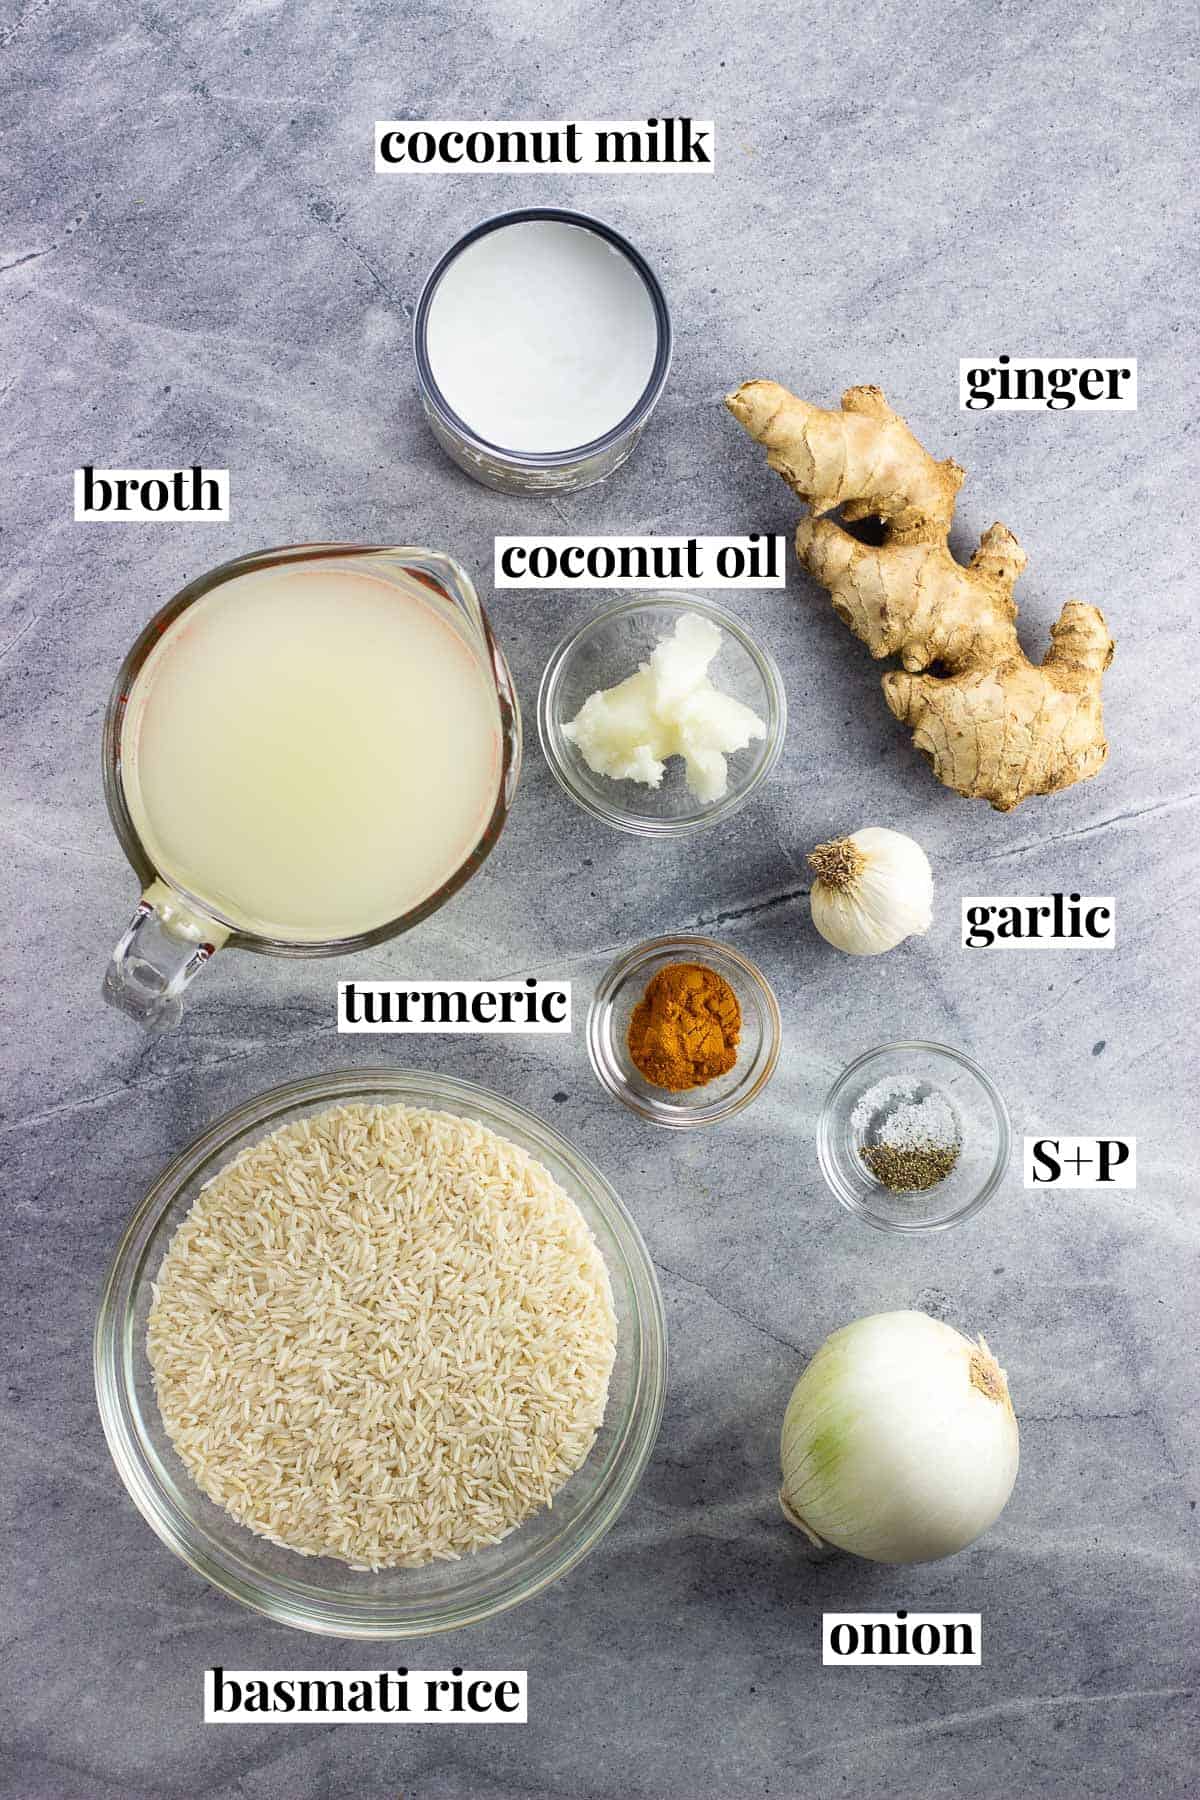 Labeled recipe ingredients in separate bowls.